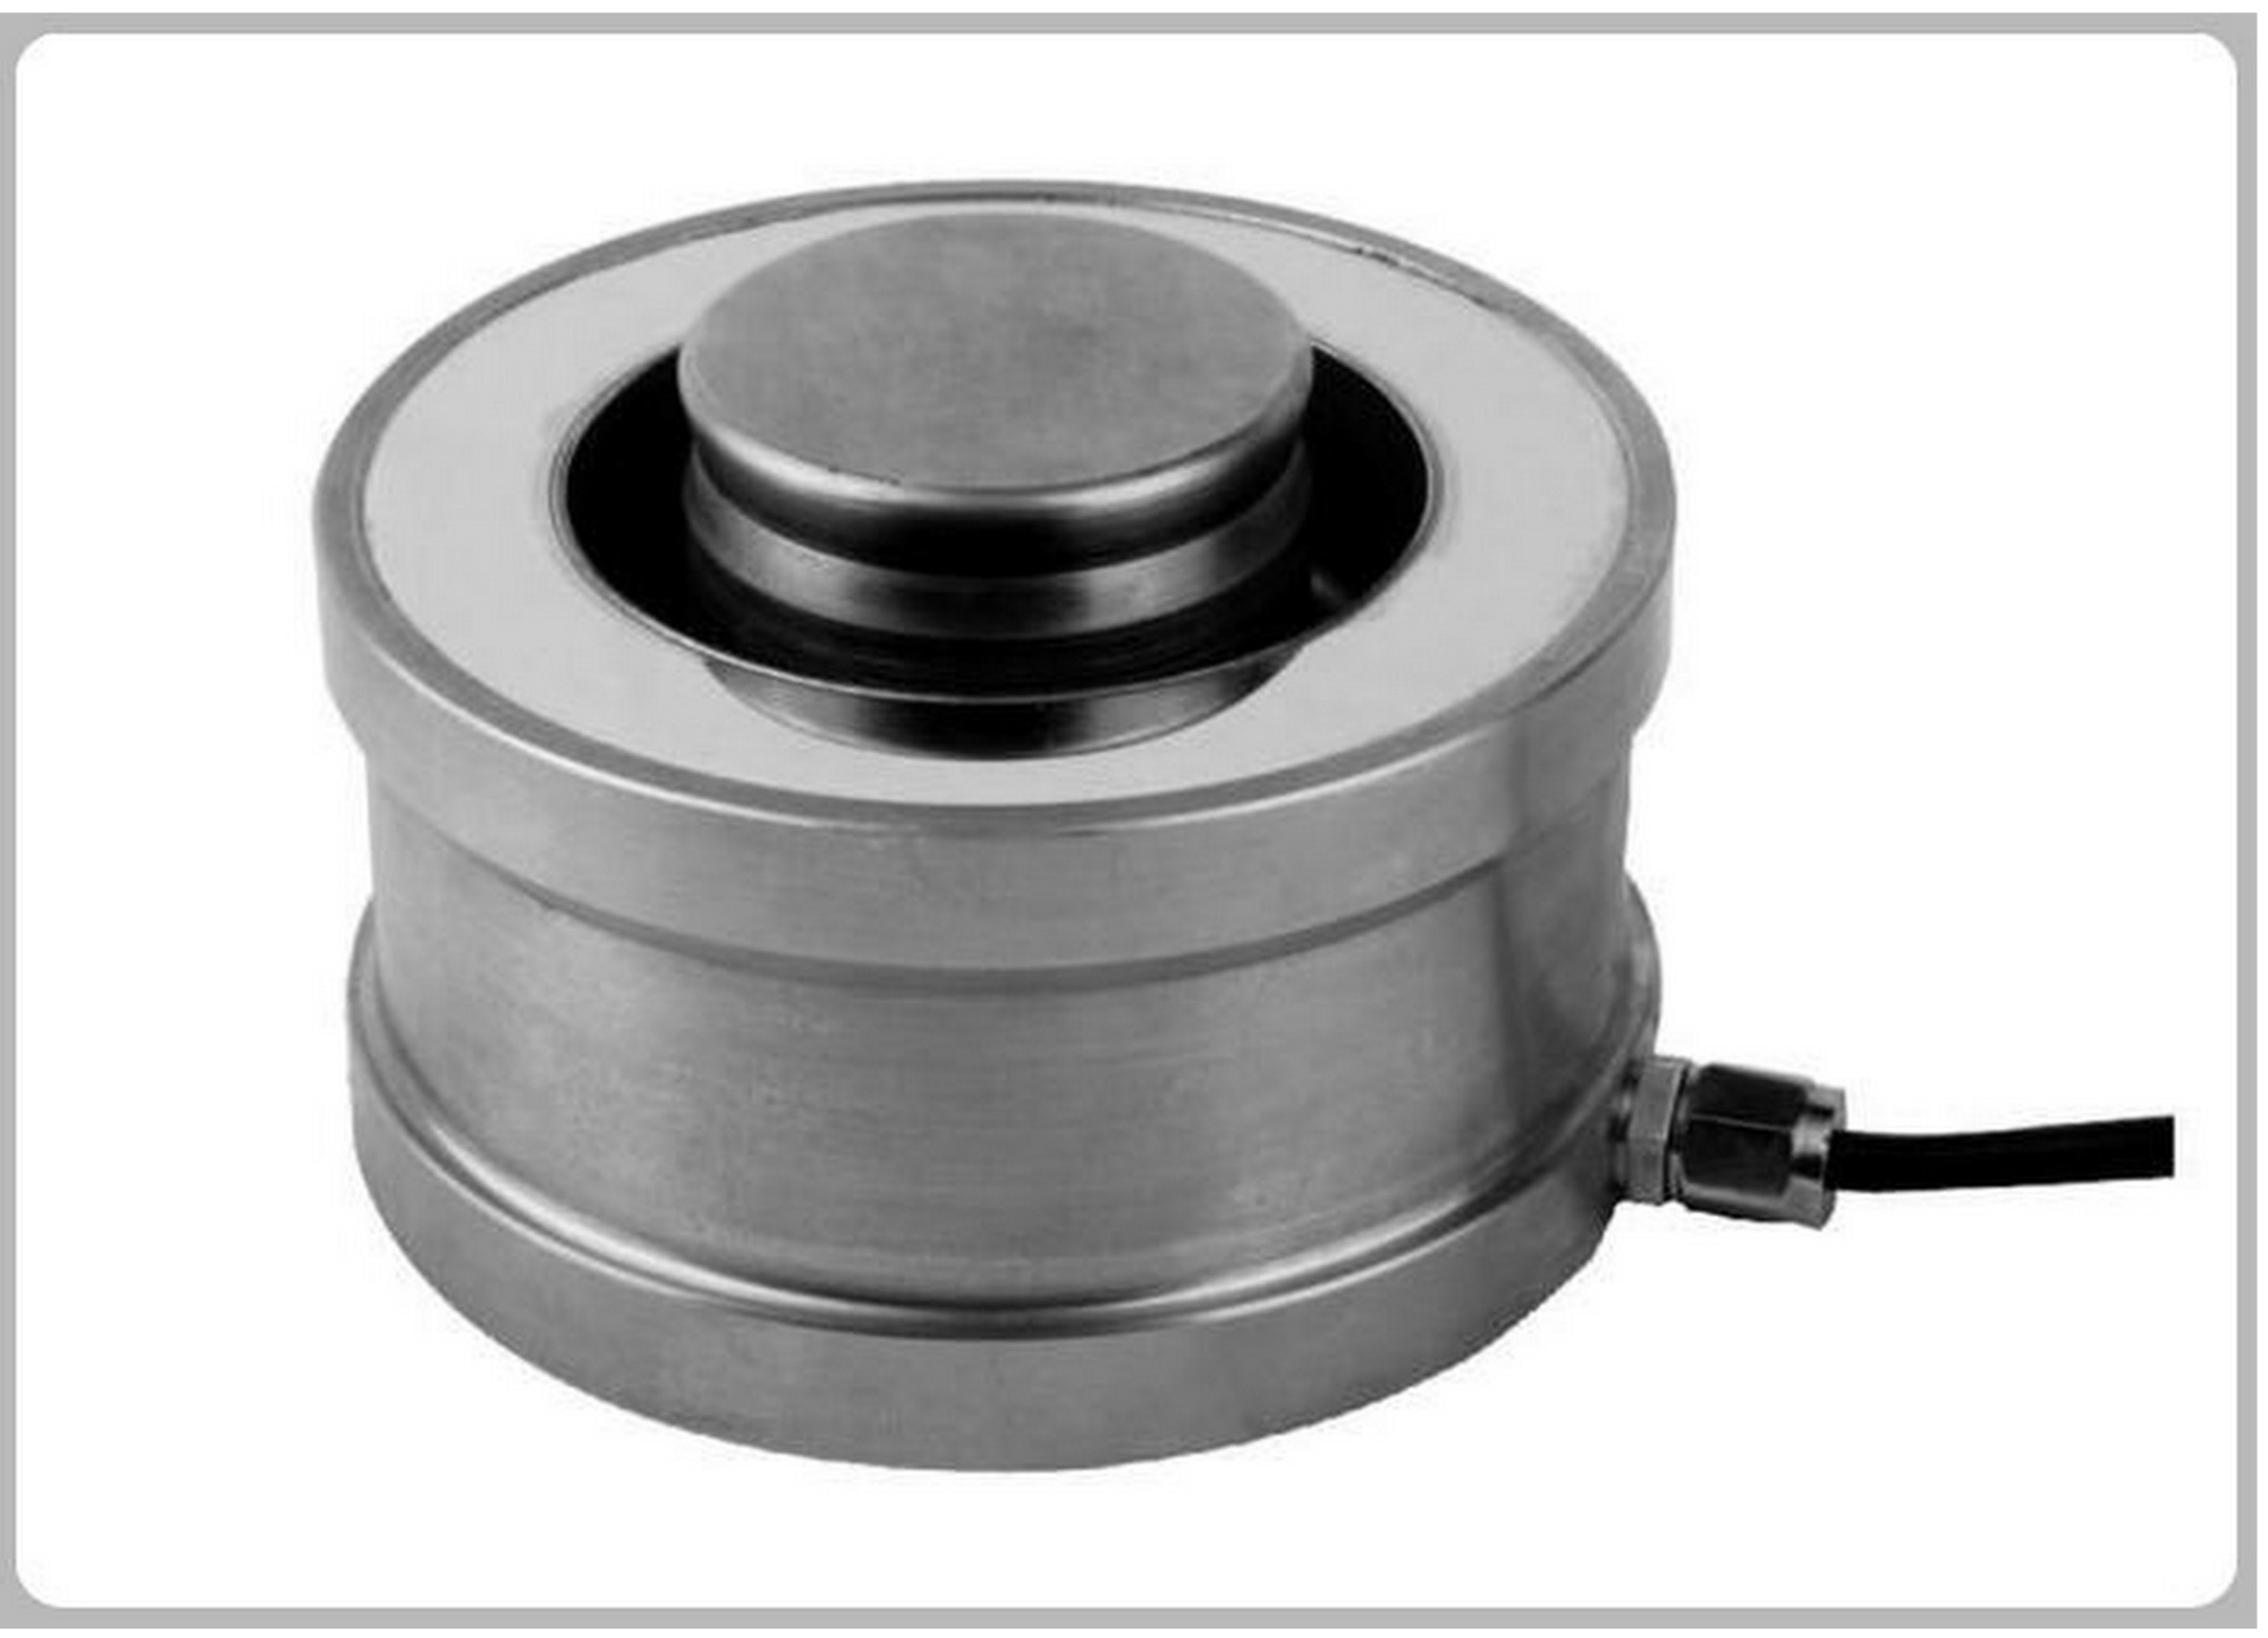 MC8704 LOAD CELL & FORCE TRANSDUCER